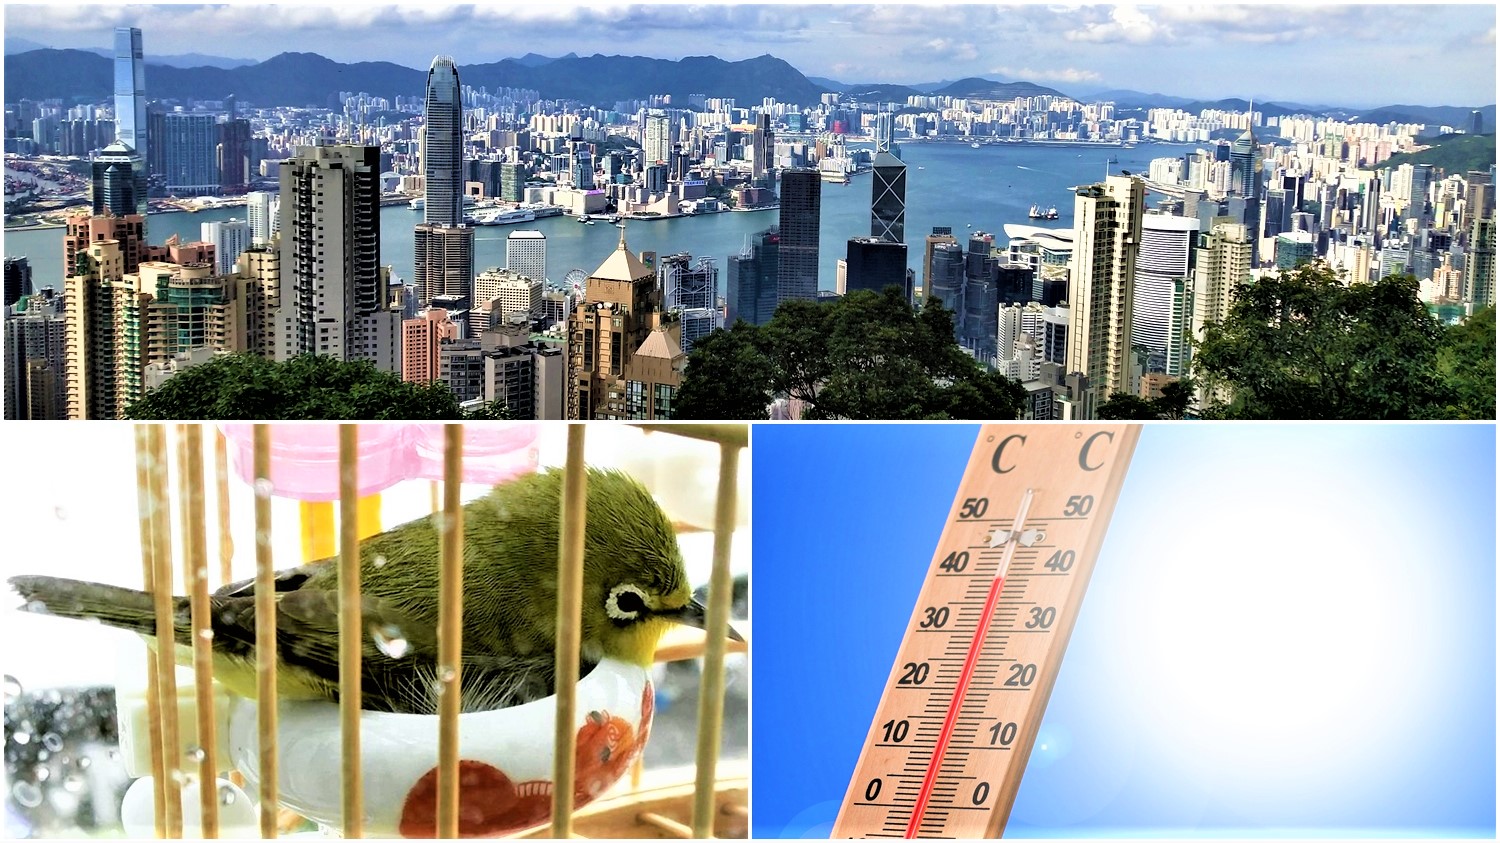 Already feel the heat in Hong Kong? You may take private car tour to go sightseeing easily!